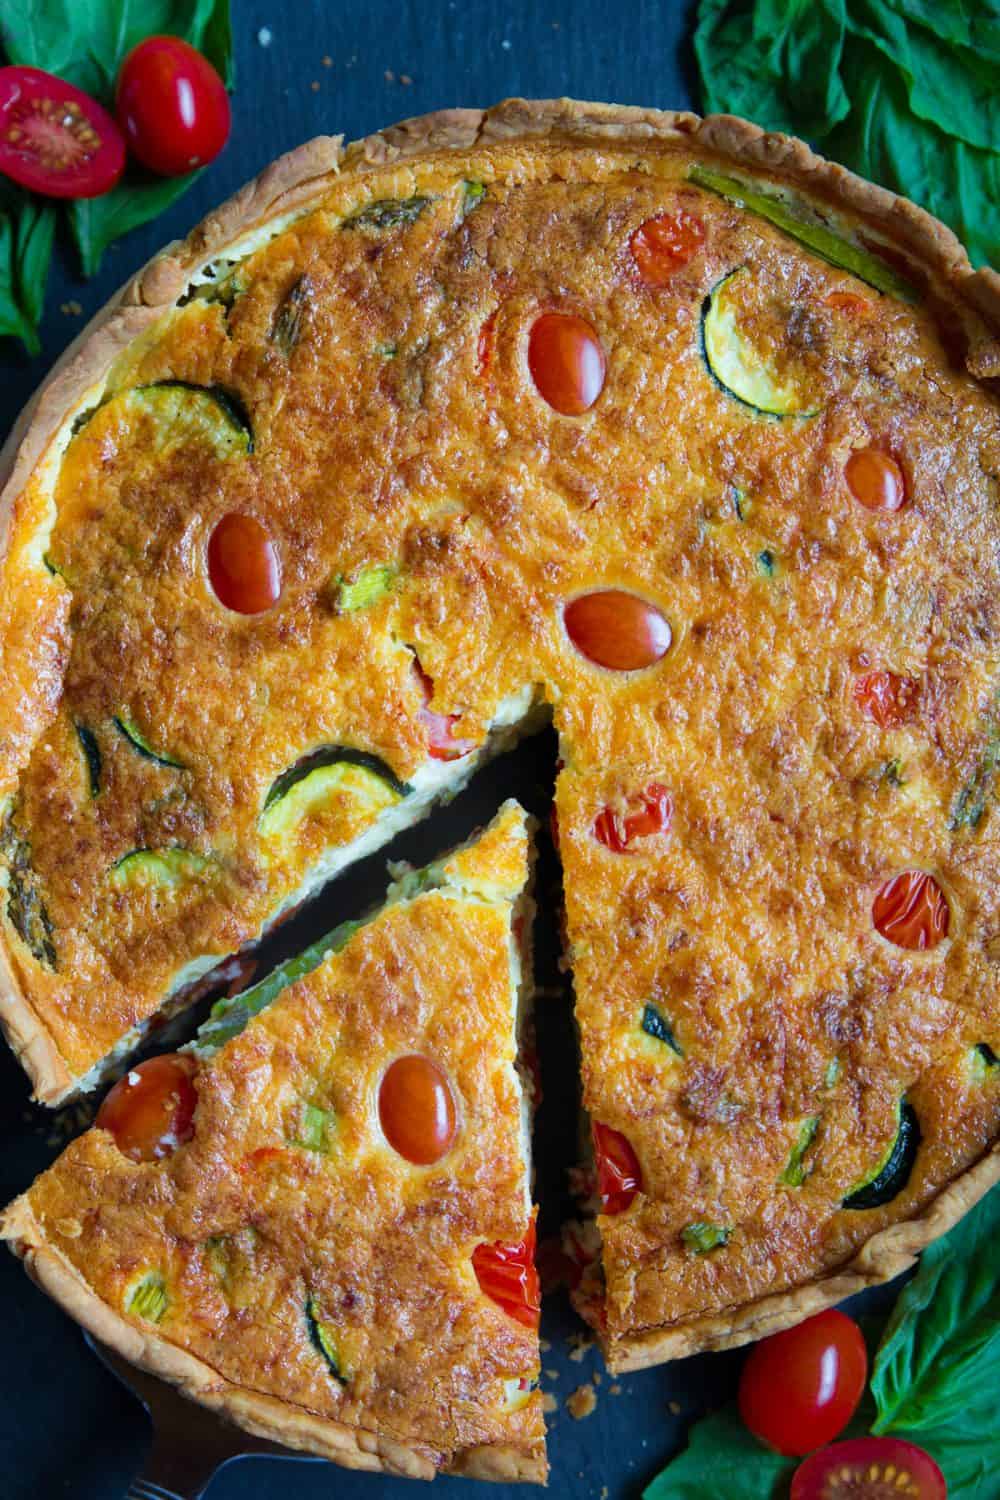 An overhead image of a baked Quiche Lorraine with zucchini, cherry tomatoes, and asparagus, with basil leaves beside it.